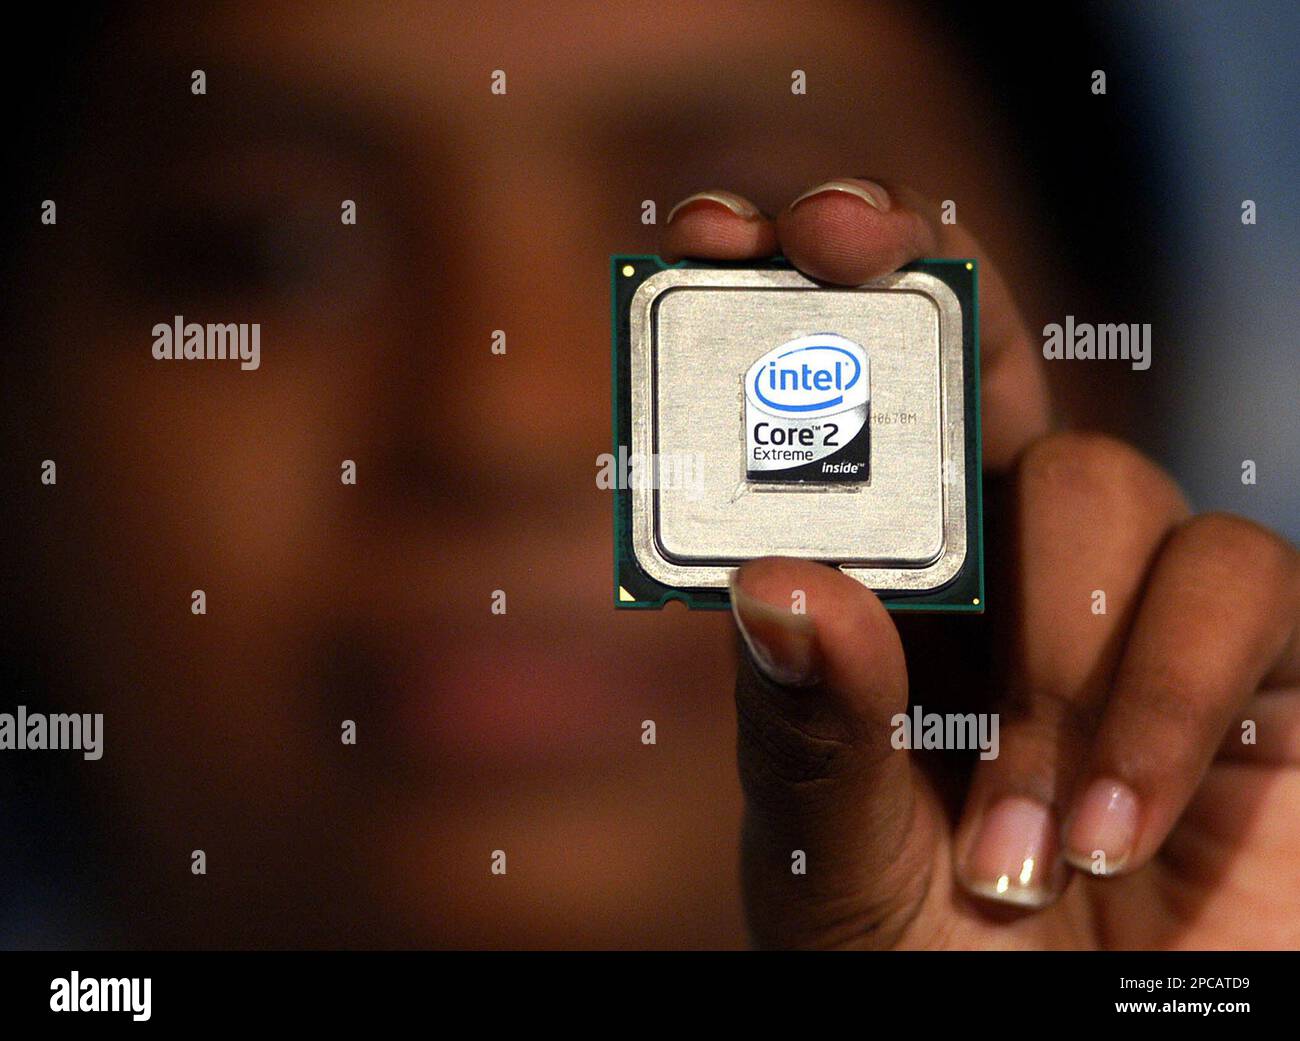 Beven etnisch Landelijk A model shows Intel's Core 2 Extreme Quad-core processor at a global launch  in Chennai, India, Tuesday, Nov. 14, 2006. Intel launched Quad-Code Intel  Xeon 5300 and Intel Core 2 Extreme Quad-core